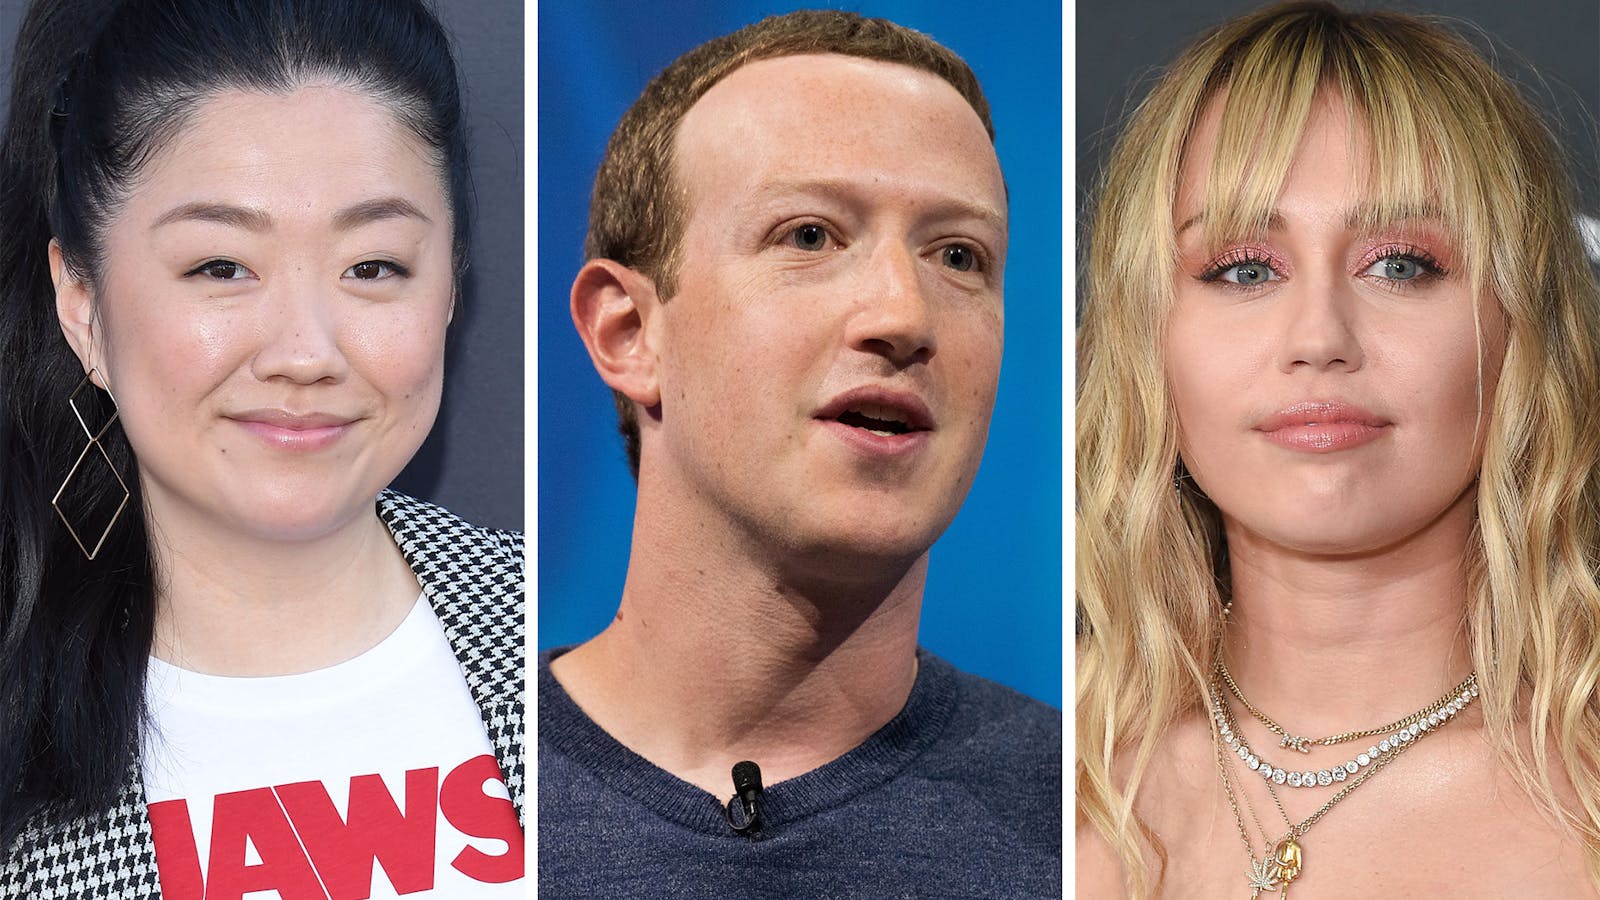 Sherry Cola, Mark Zuckerberg and Miley Cyrus. Photos by Shutterstock